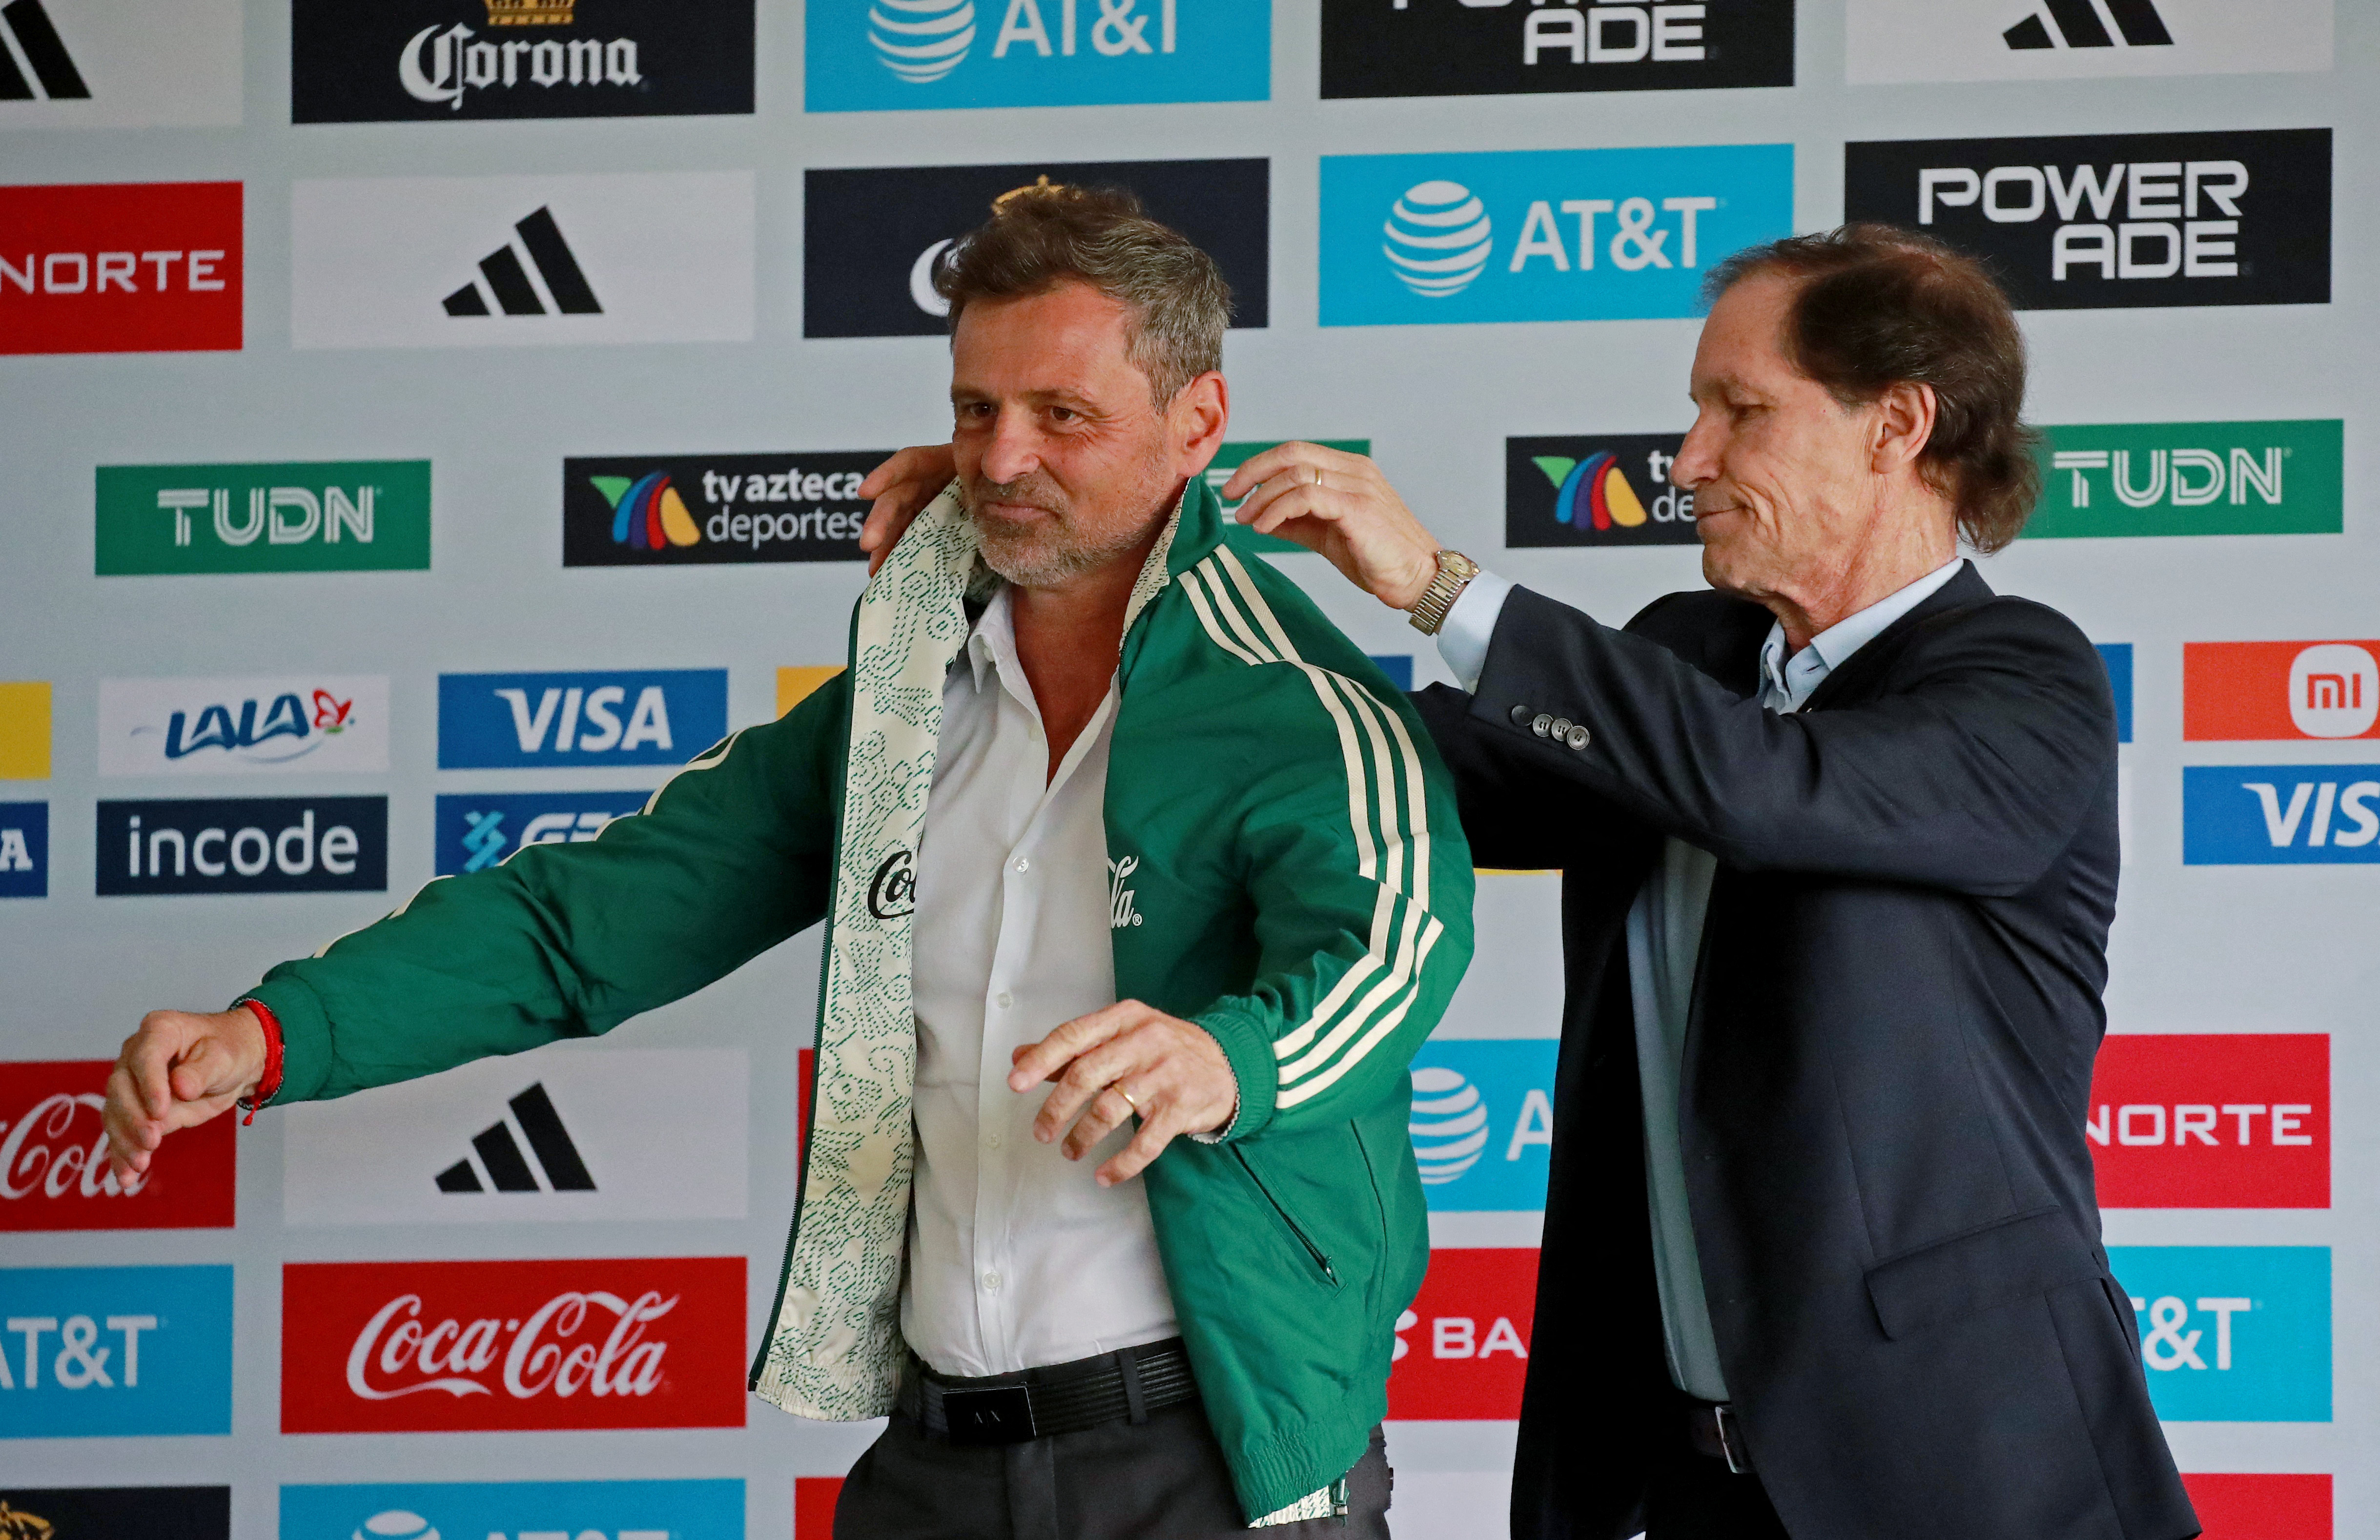 Soccer Football - Diego Cocca is unveiled as new Mexico coach - Centro de Alto Rendimiento, Mexico City, Mexico - February 10, 2023 Diego Cocca during press conference with Sports director Jaime Ordiales REUTERS/Henry Romero